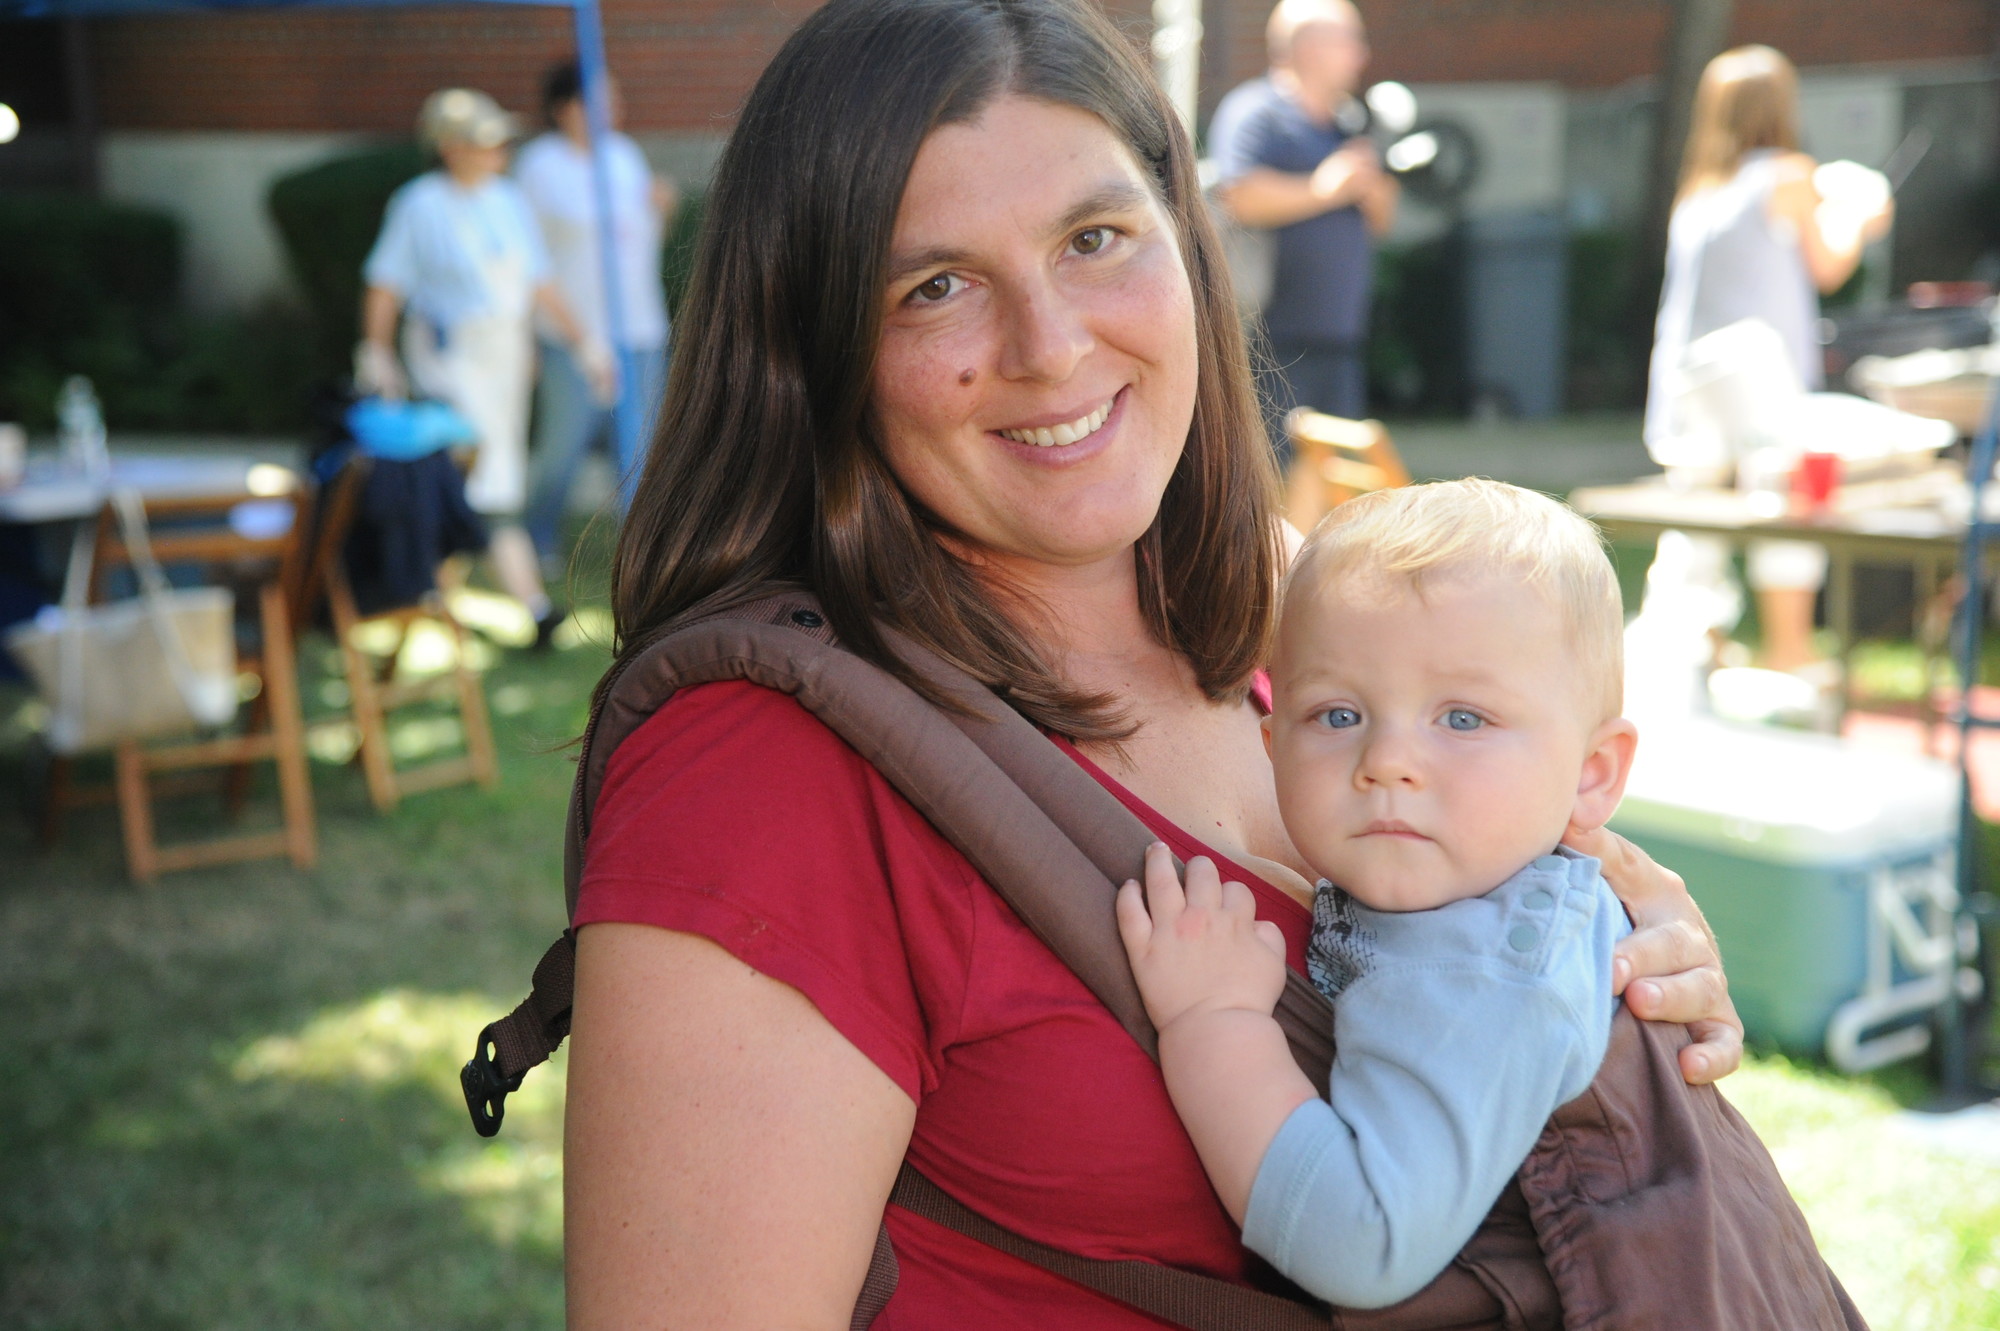 One of the festival’s youngest attendees, Luke, 10 months old, with his mother, Denise Kraus.